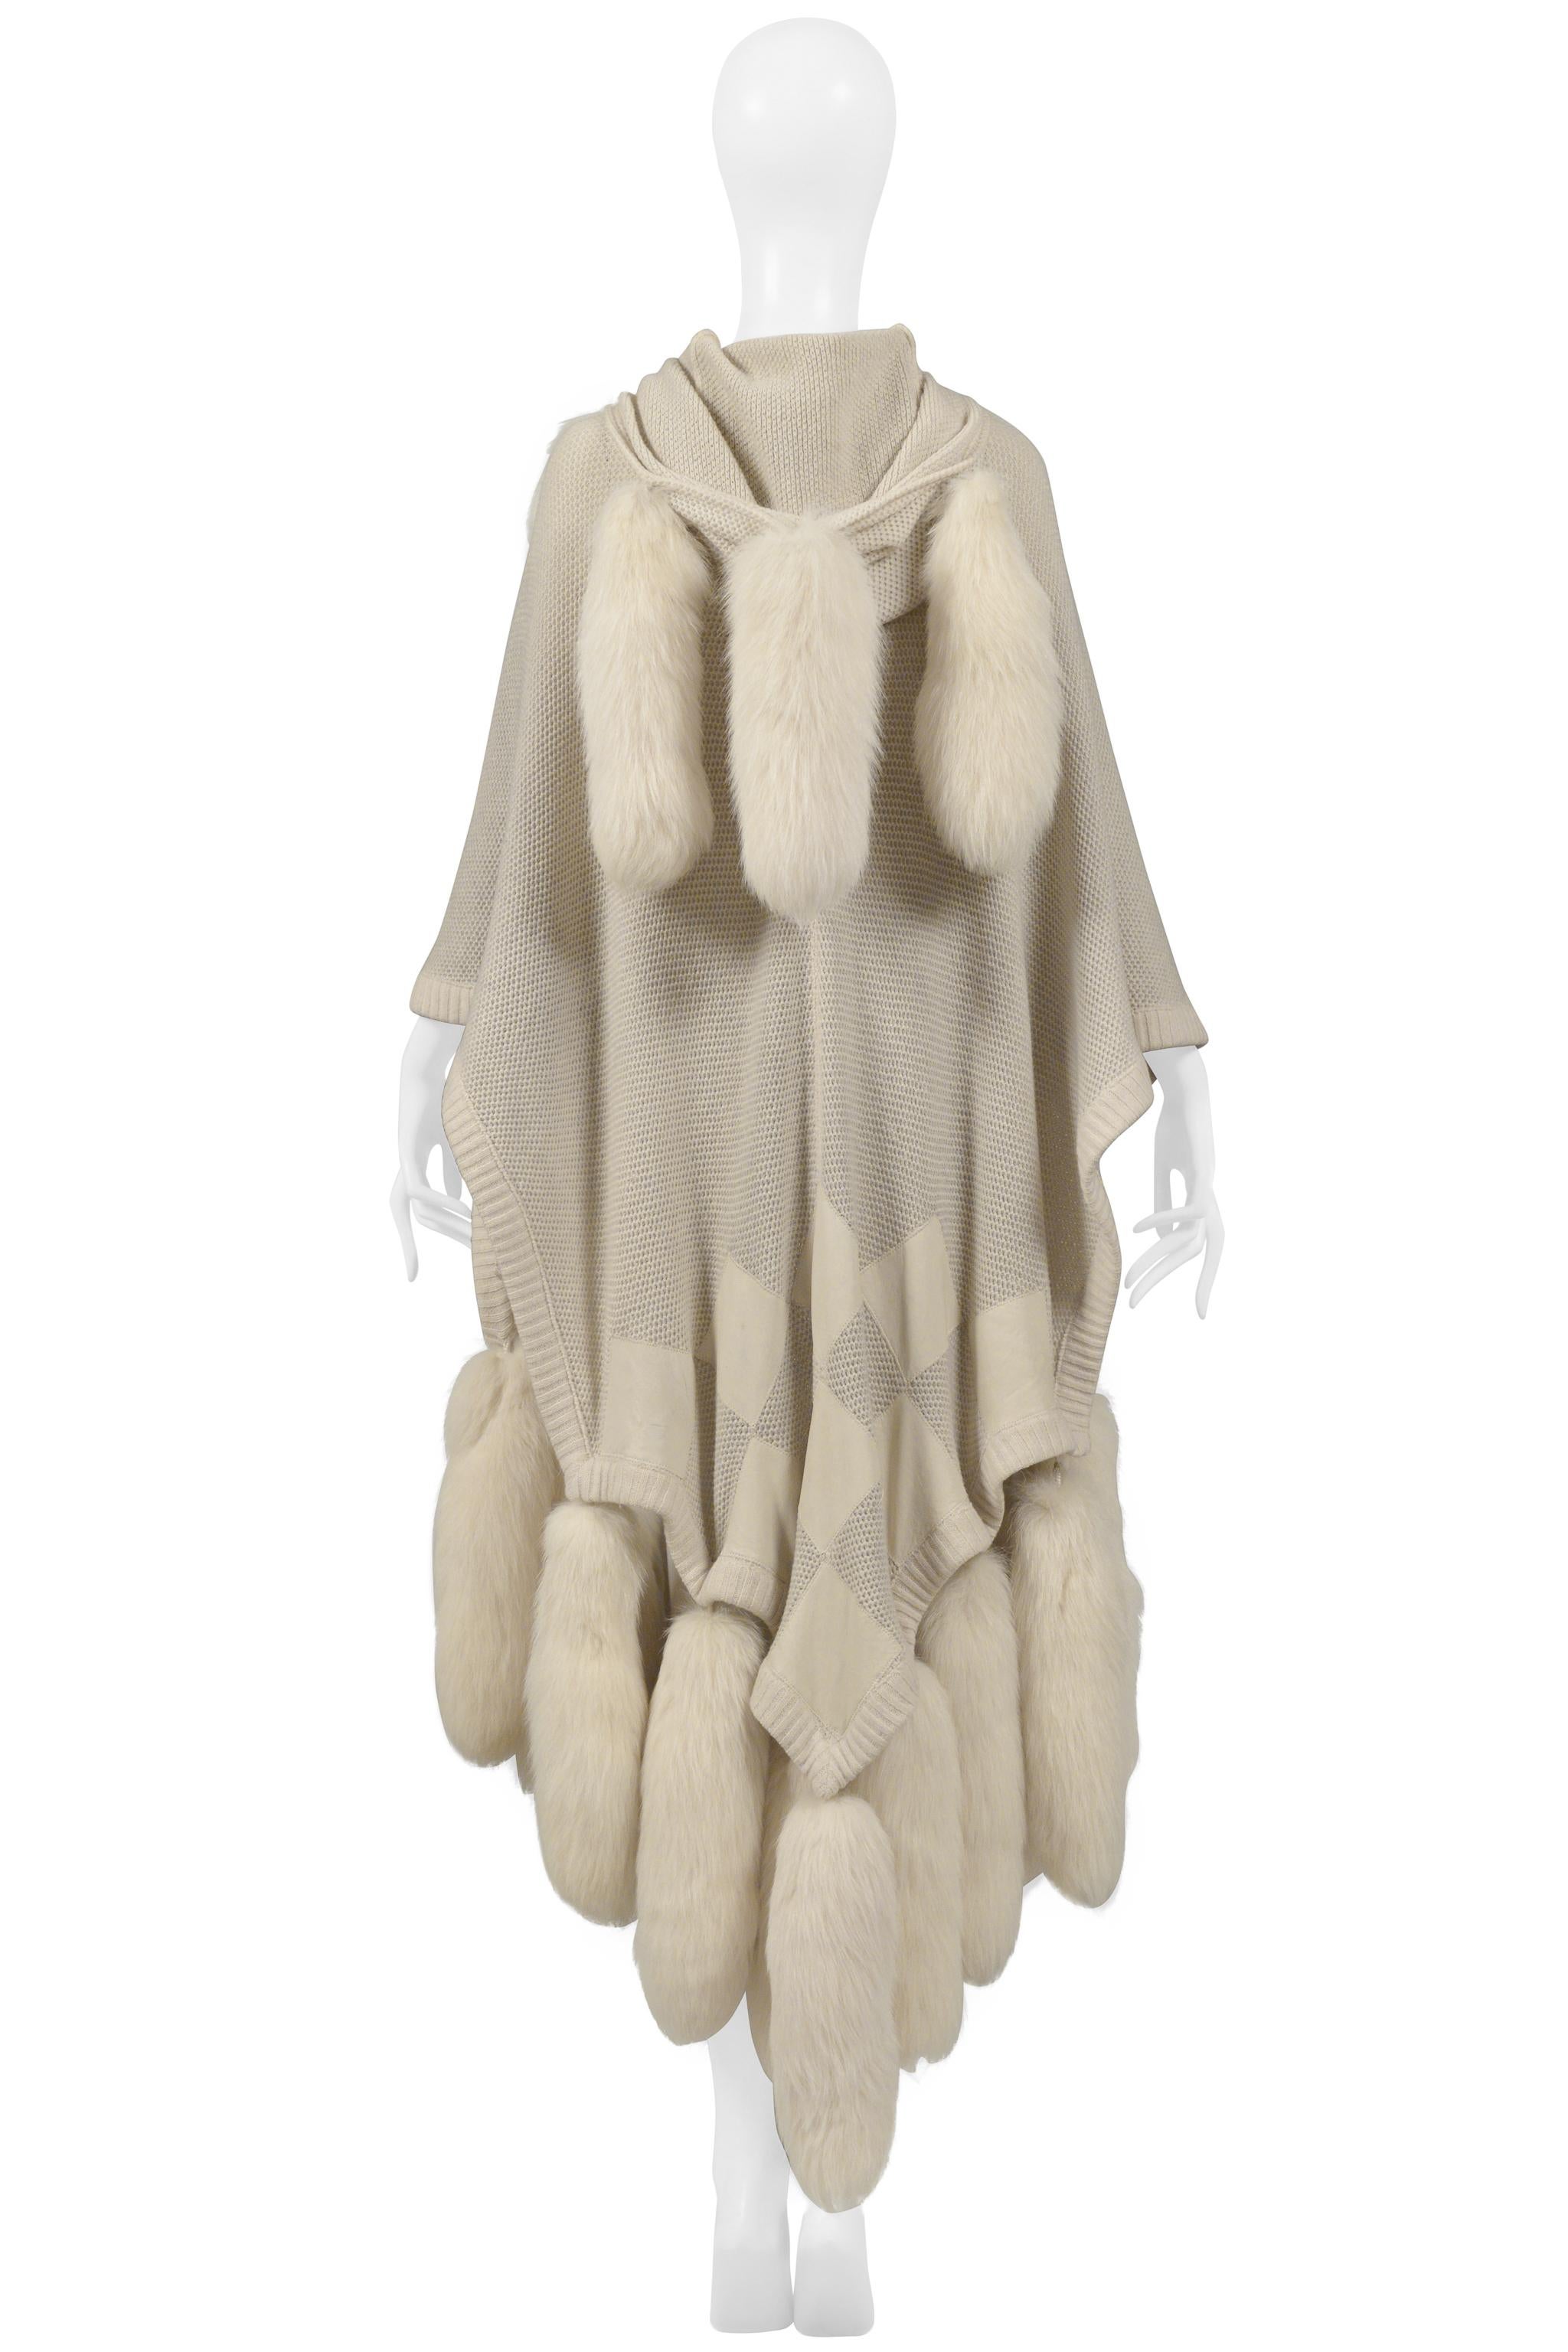 Alimia Paris Off-White Cape With Fur Tails & Leather Patches In Excellent Condition For Sale In Los Angeles, CA